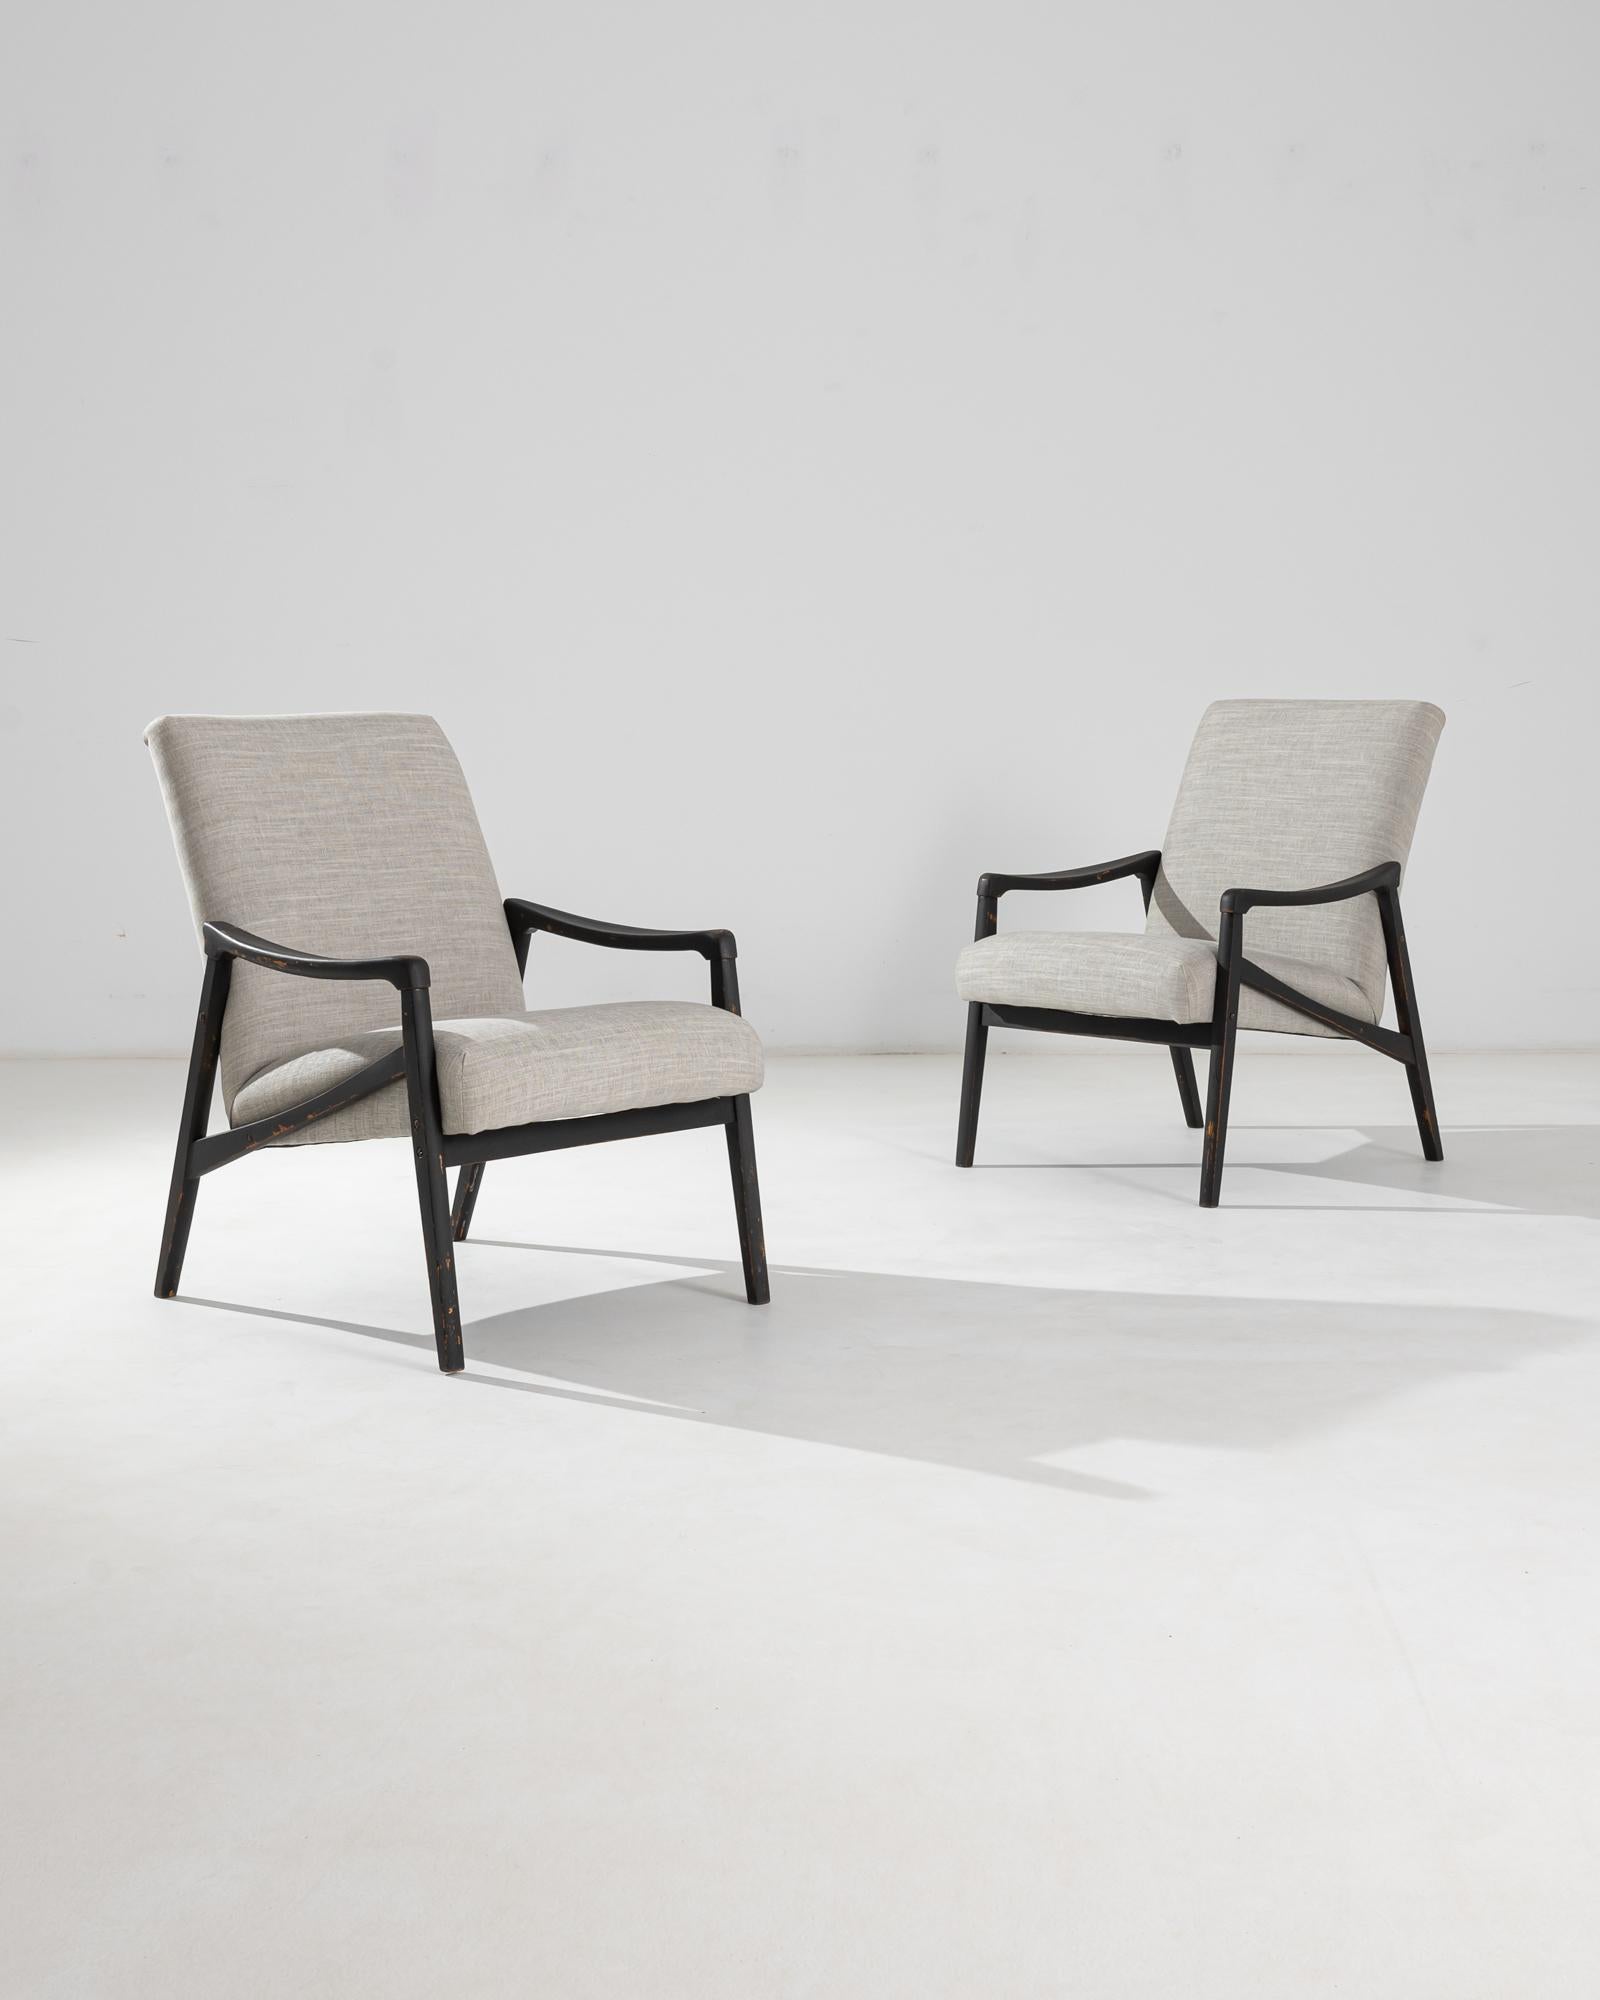 A pair of armchairs produced in the former Czechoslovakia, with the design attributed to Jiri Jiroutek. This 1960s design is re-upholstered in an updated heather grey upholstery; the neutral tone was chosen to compliment the polished patina of the